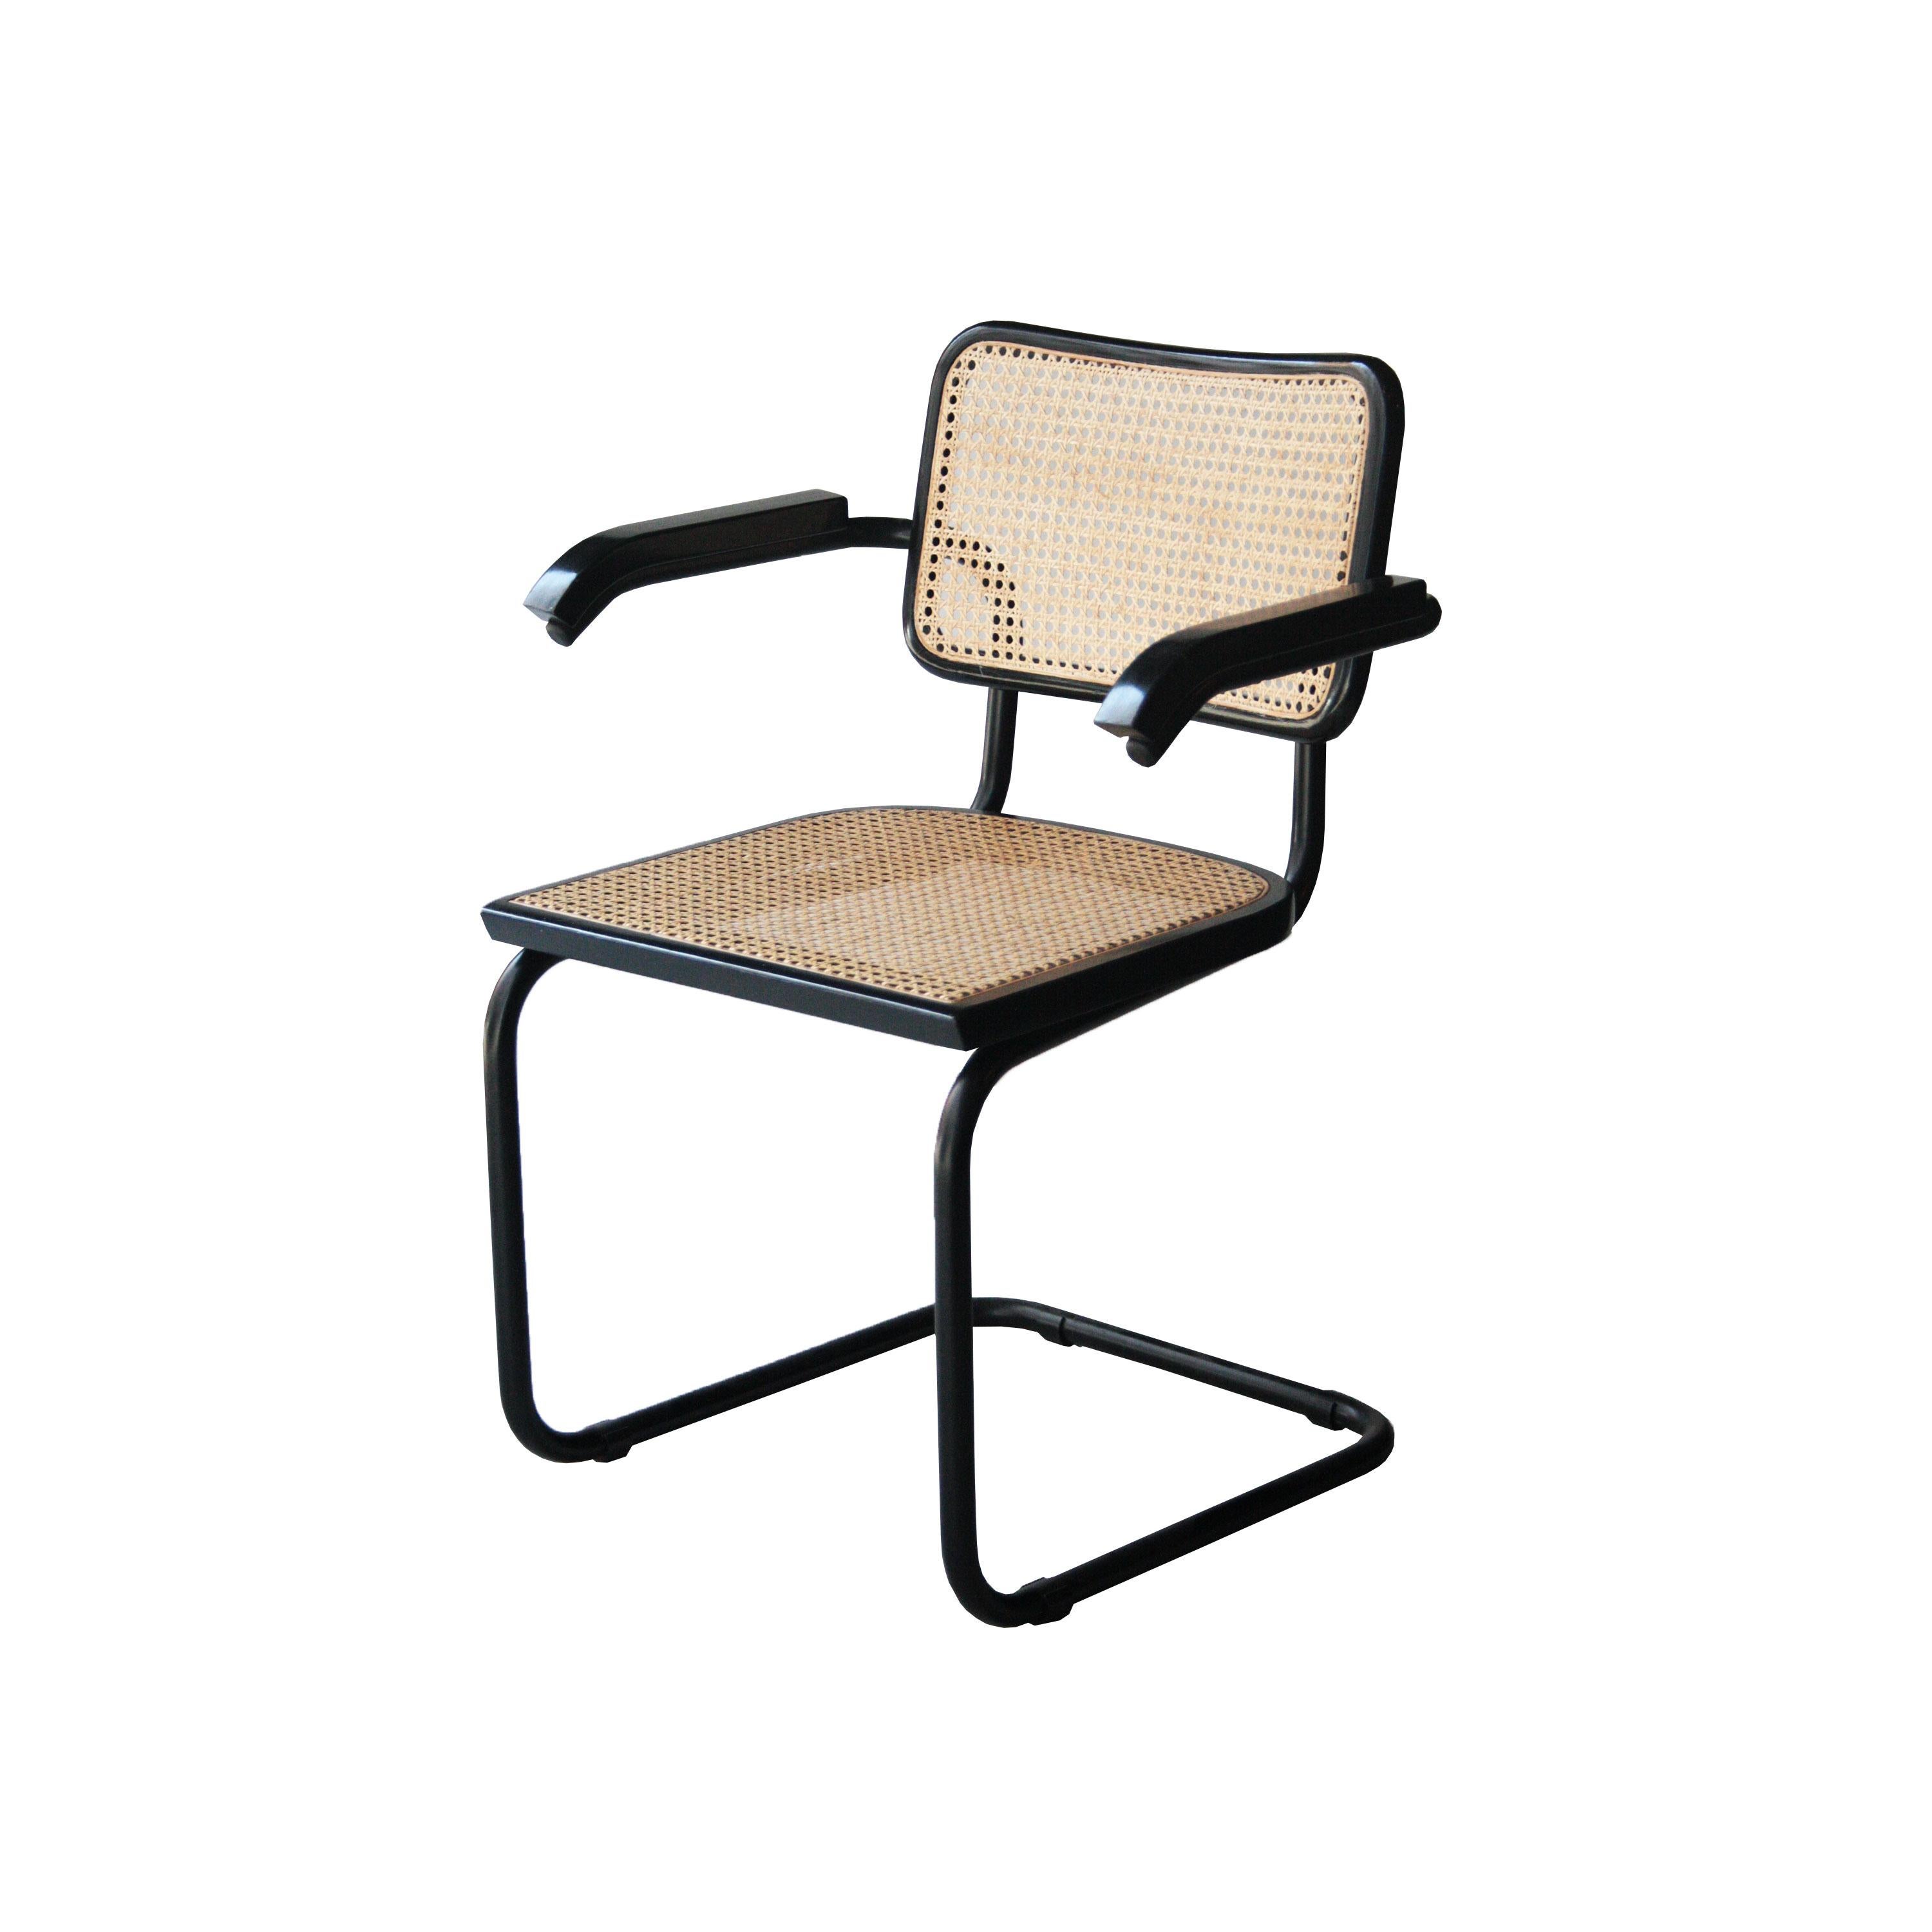 Set of four chairs model B64, Cesca designed by Marcel Breuer (1902-1981). With structure made of tubular steel lacquered in black, seat and back in wicker and wood lacquered in black. German design originated in 1927 and produced by Gavina in Italy